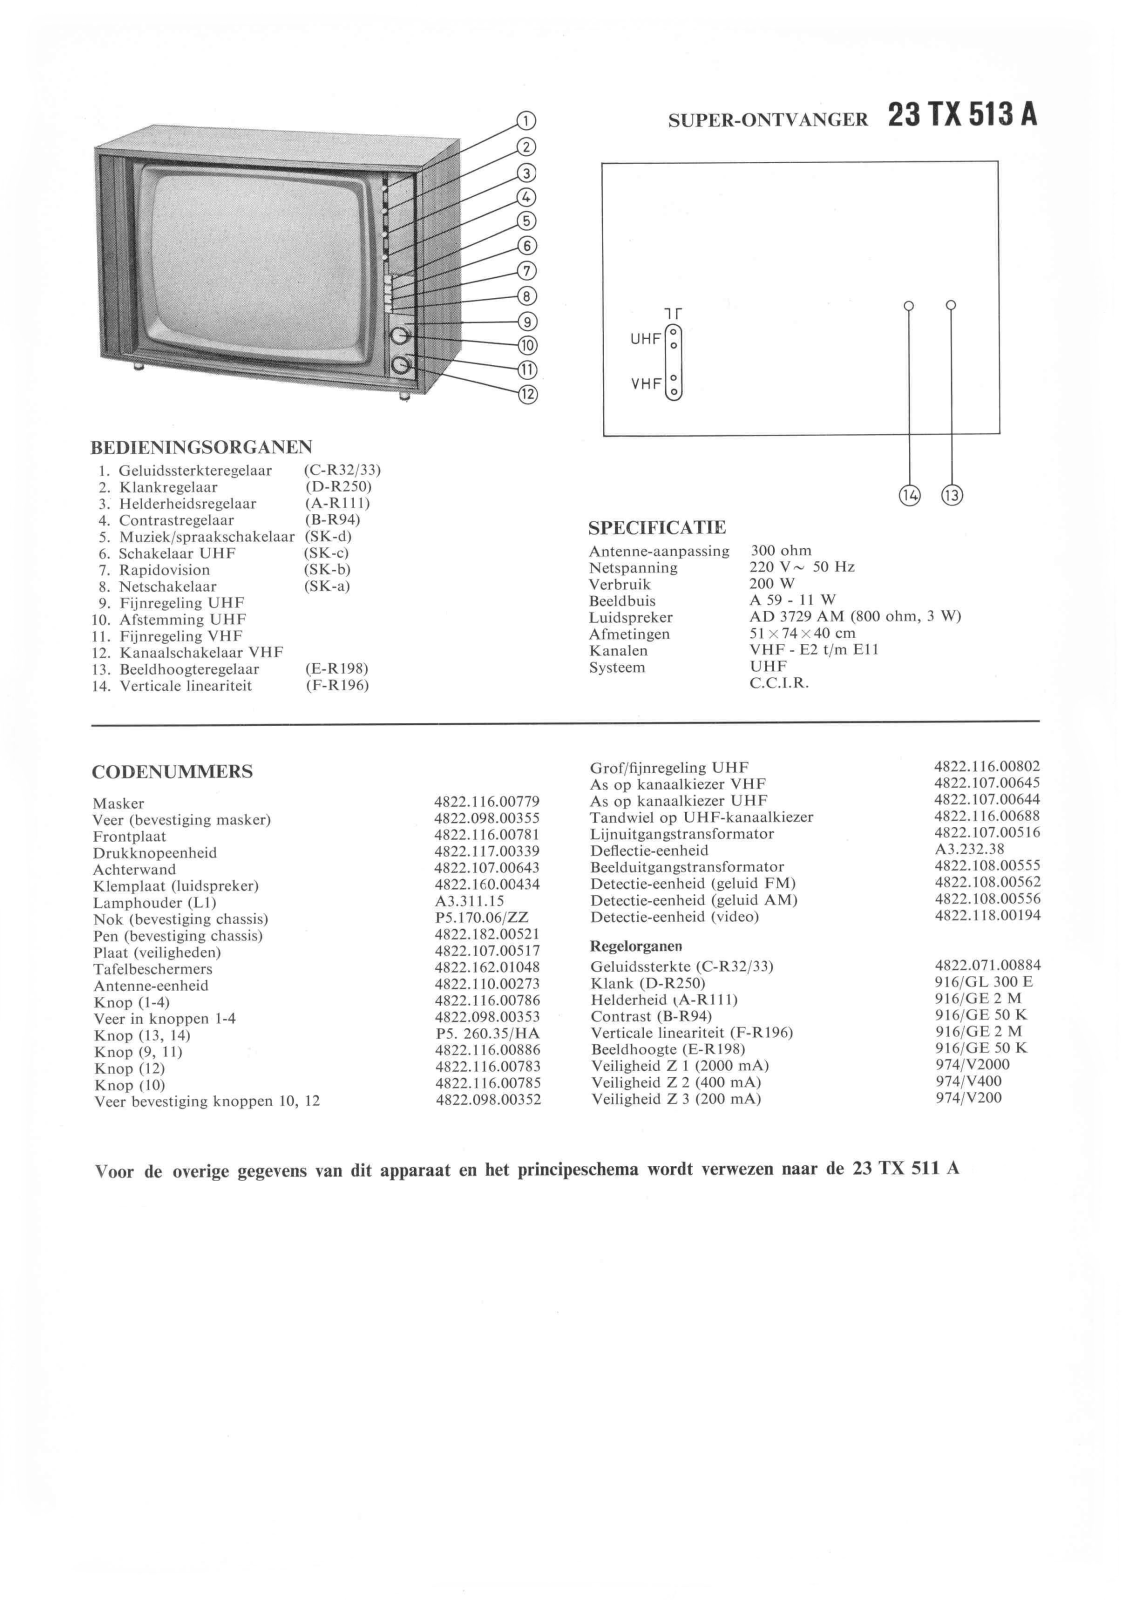 PHILIPS 23TX513A Service Manual